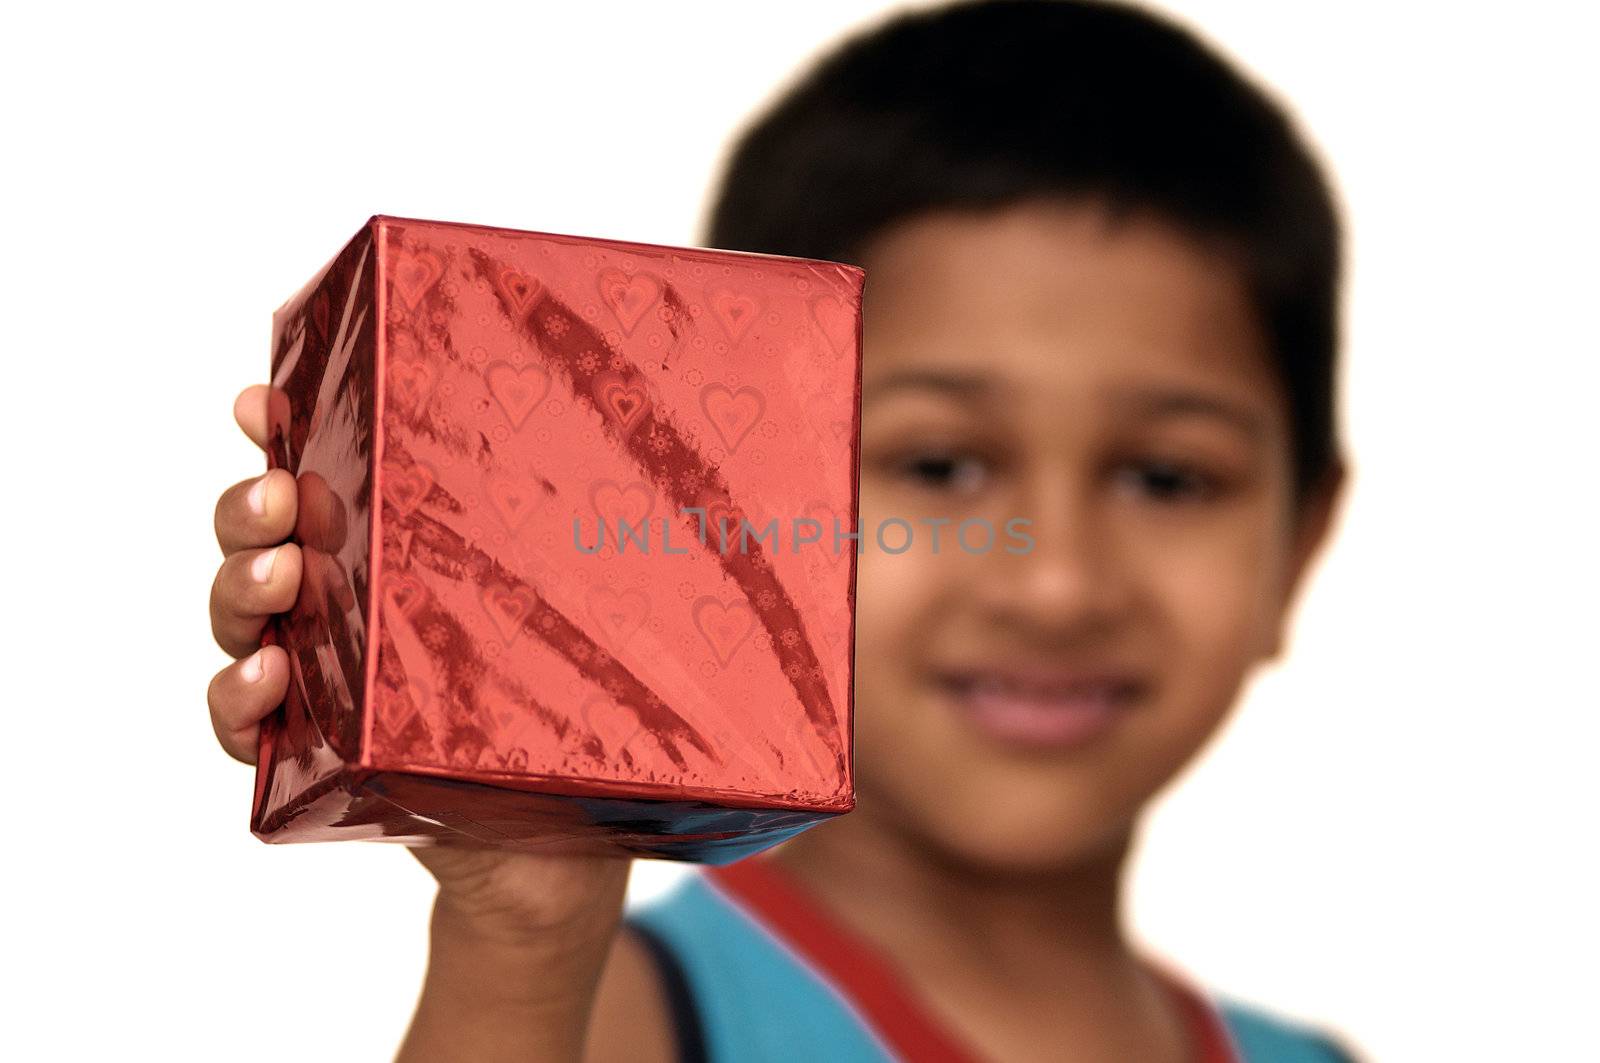 An yound Indian kid holding a gift for you